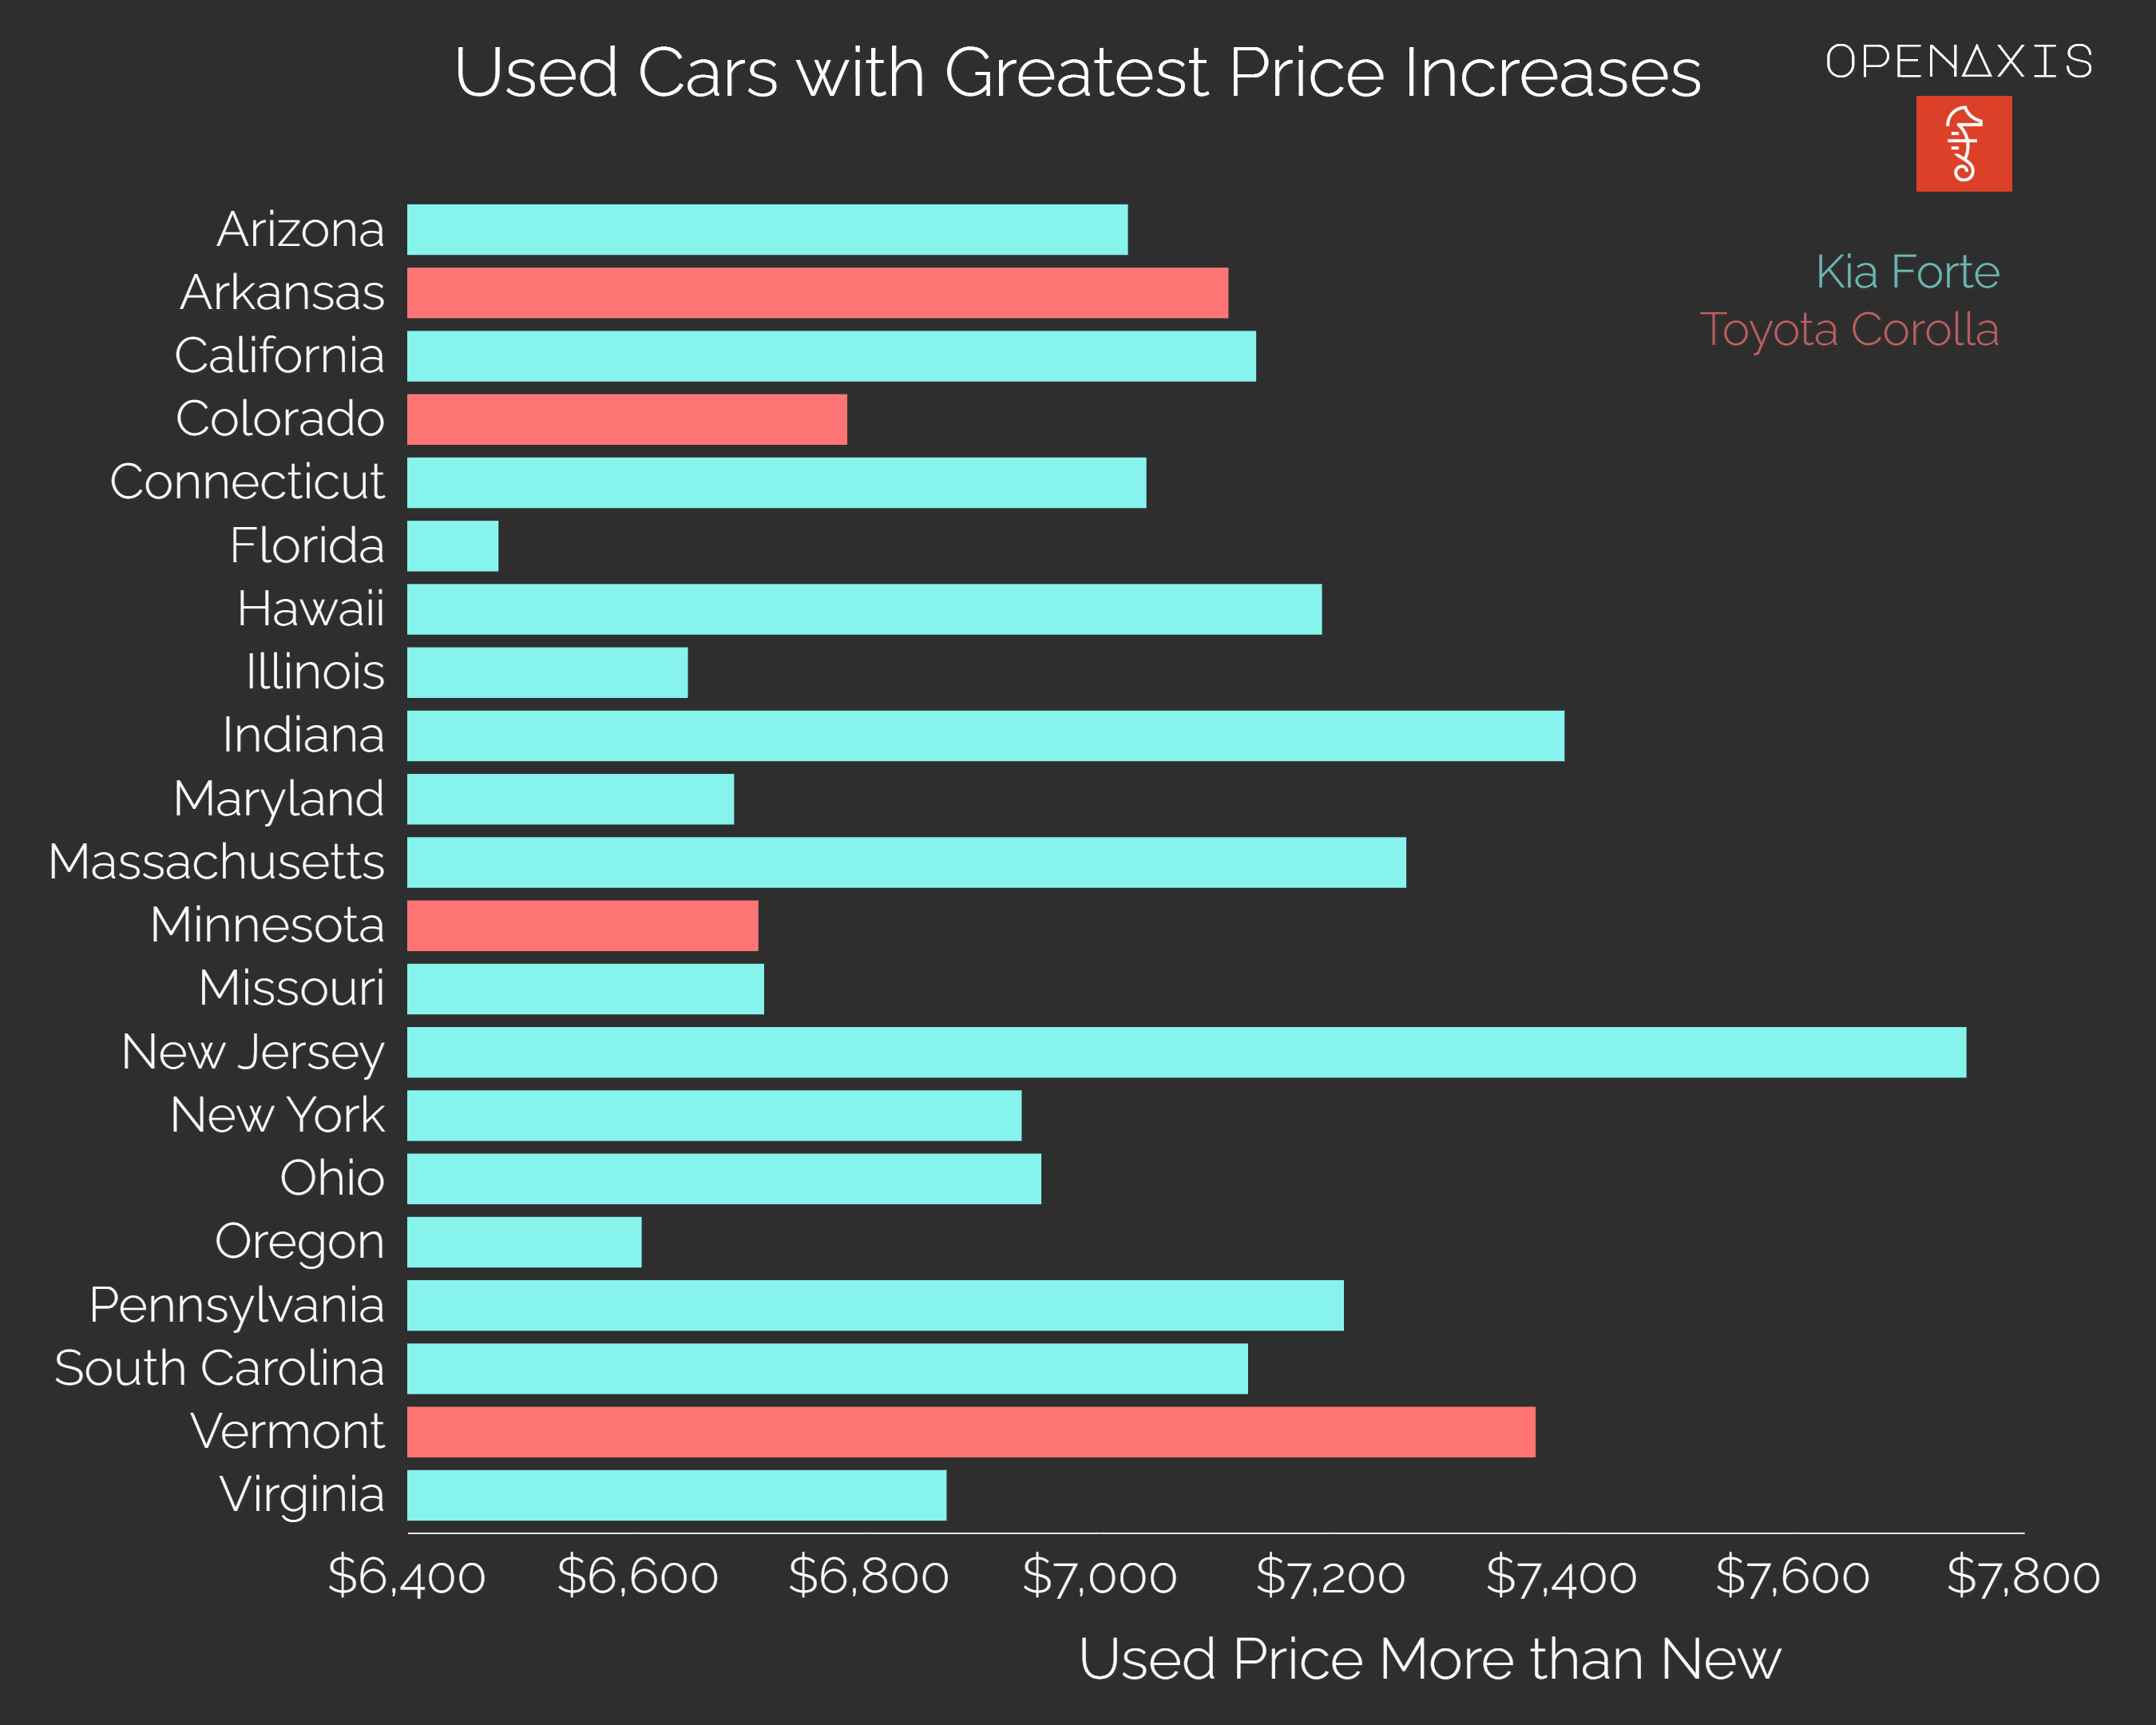 "Used Cars with Greatest Price Increases"